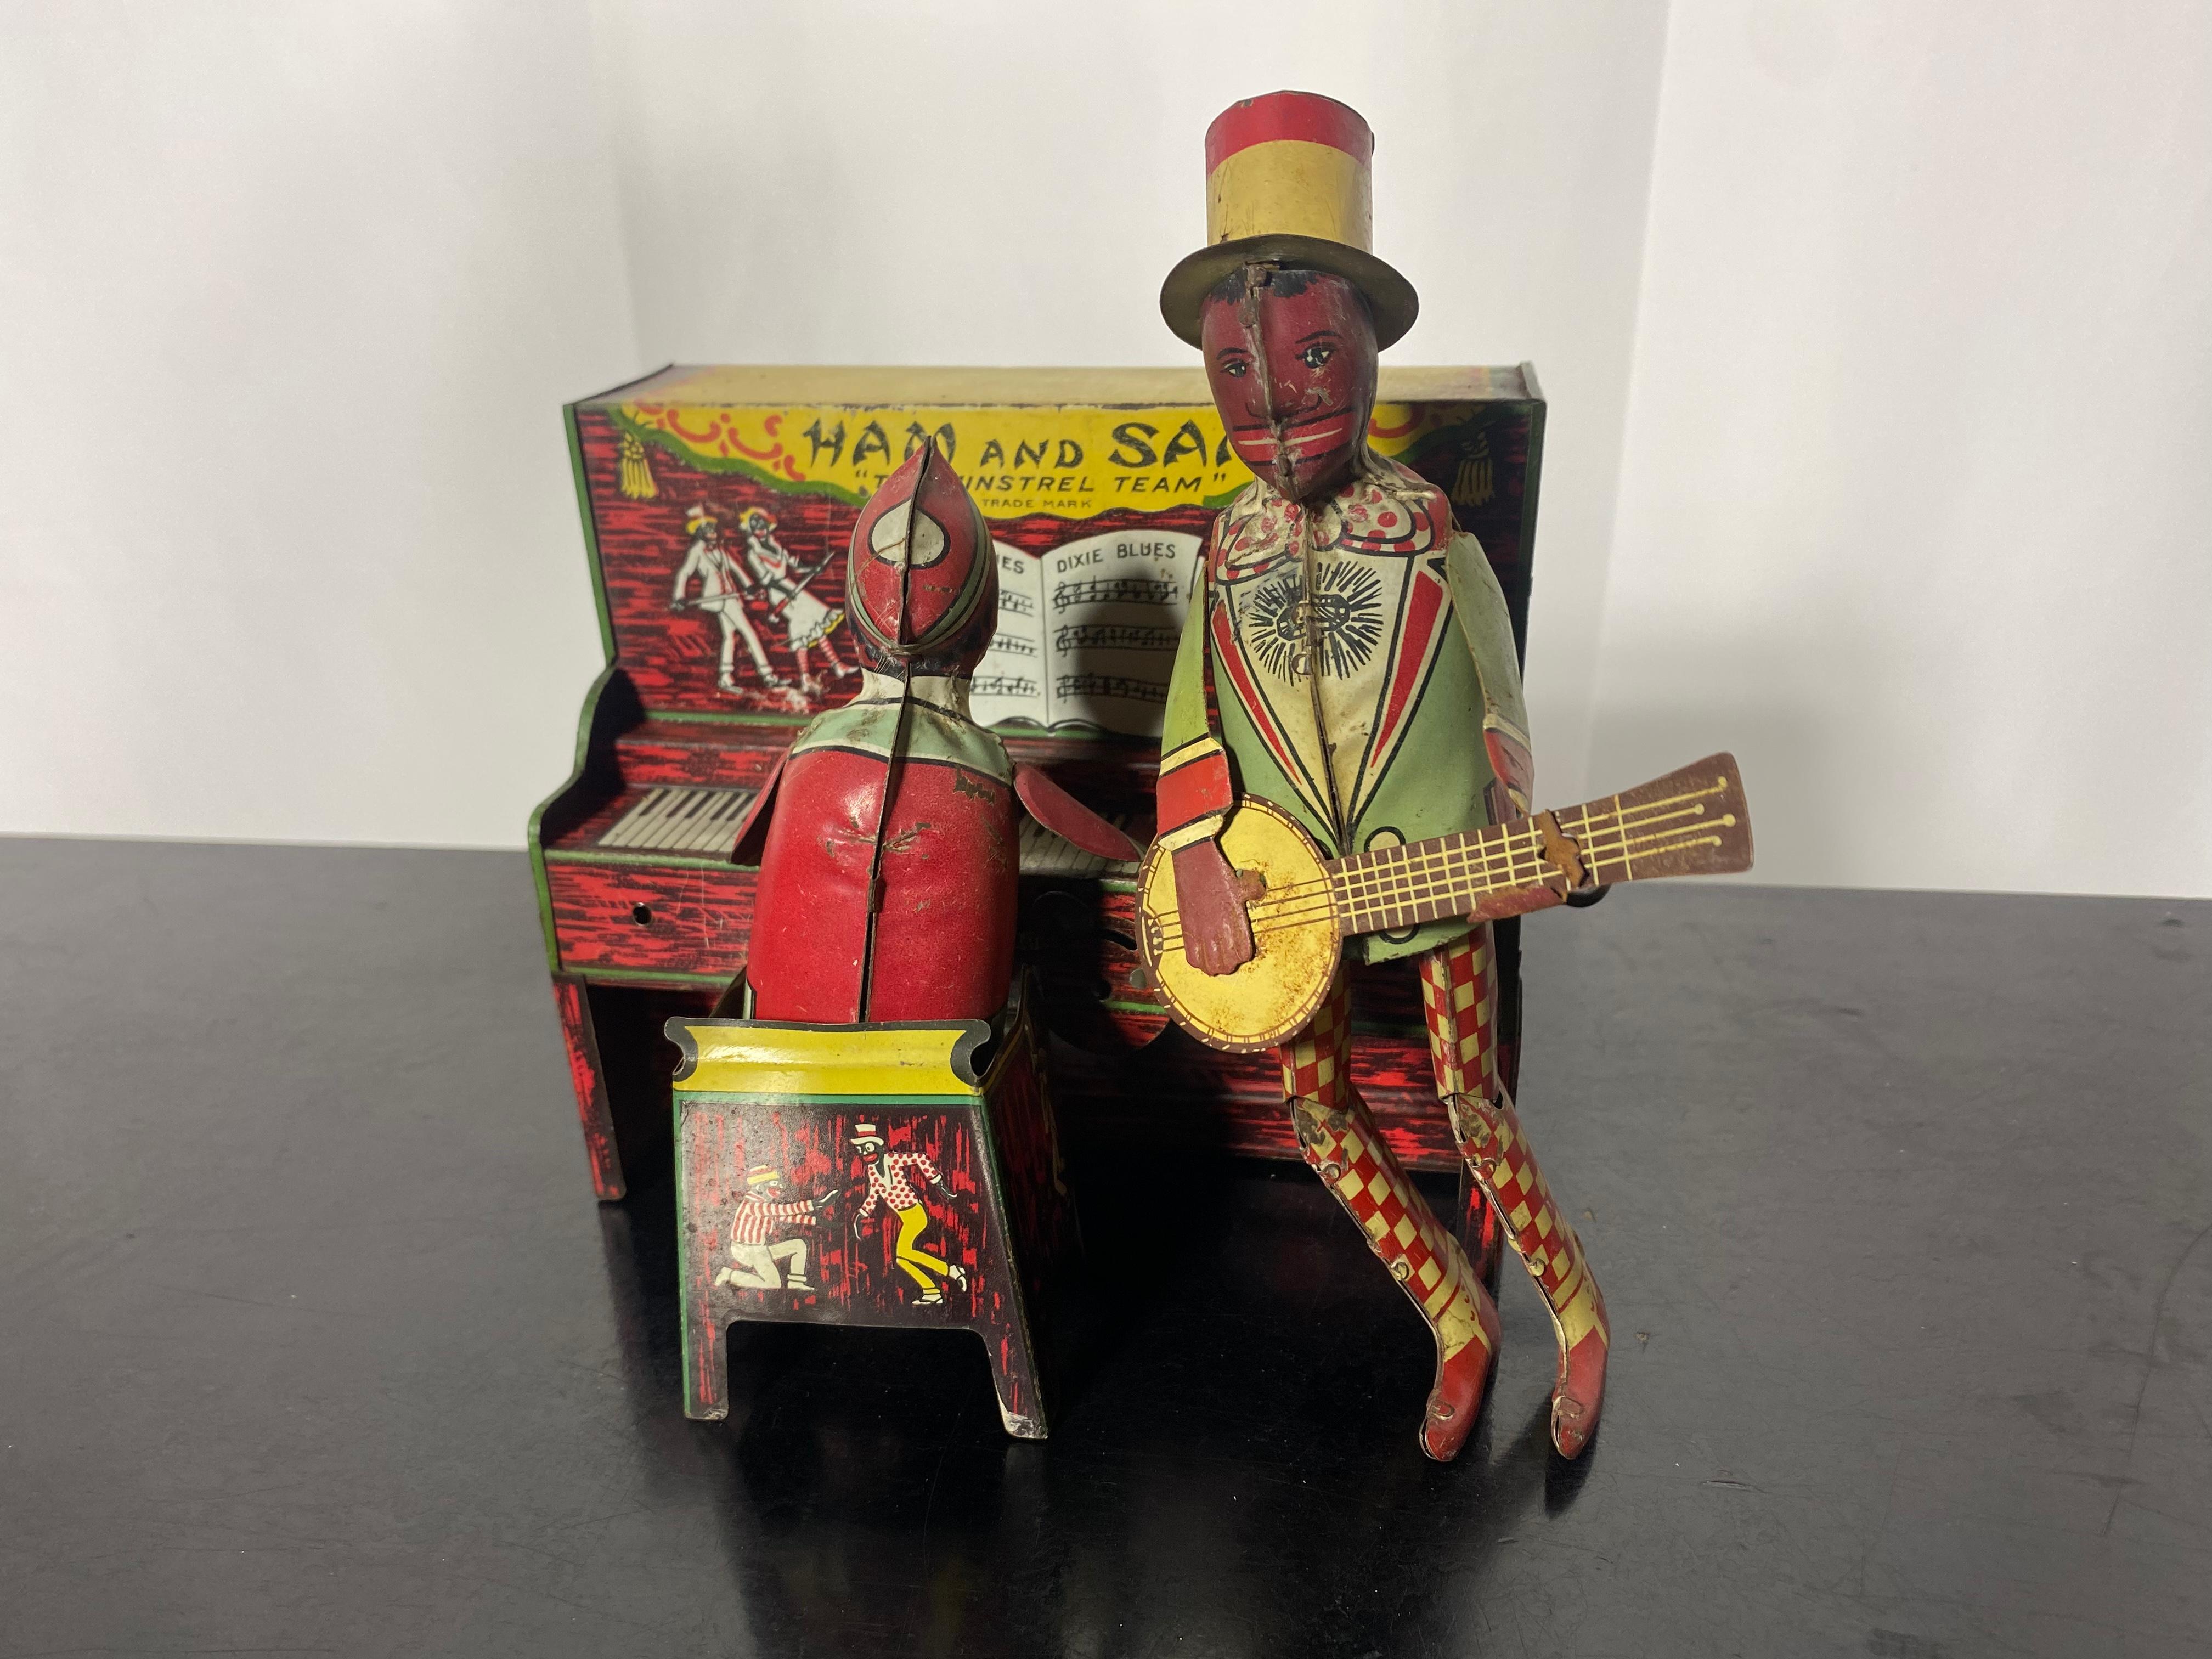 American Windup Ham and Sam “The Minstrel Team” Tin Litho Toy c.1921, ,  Piano / banjo For Sale